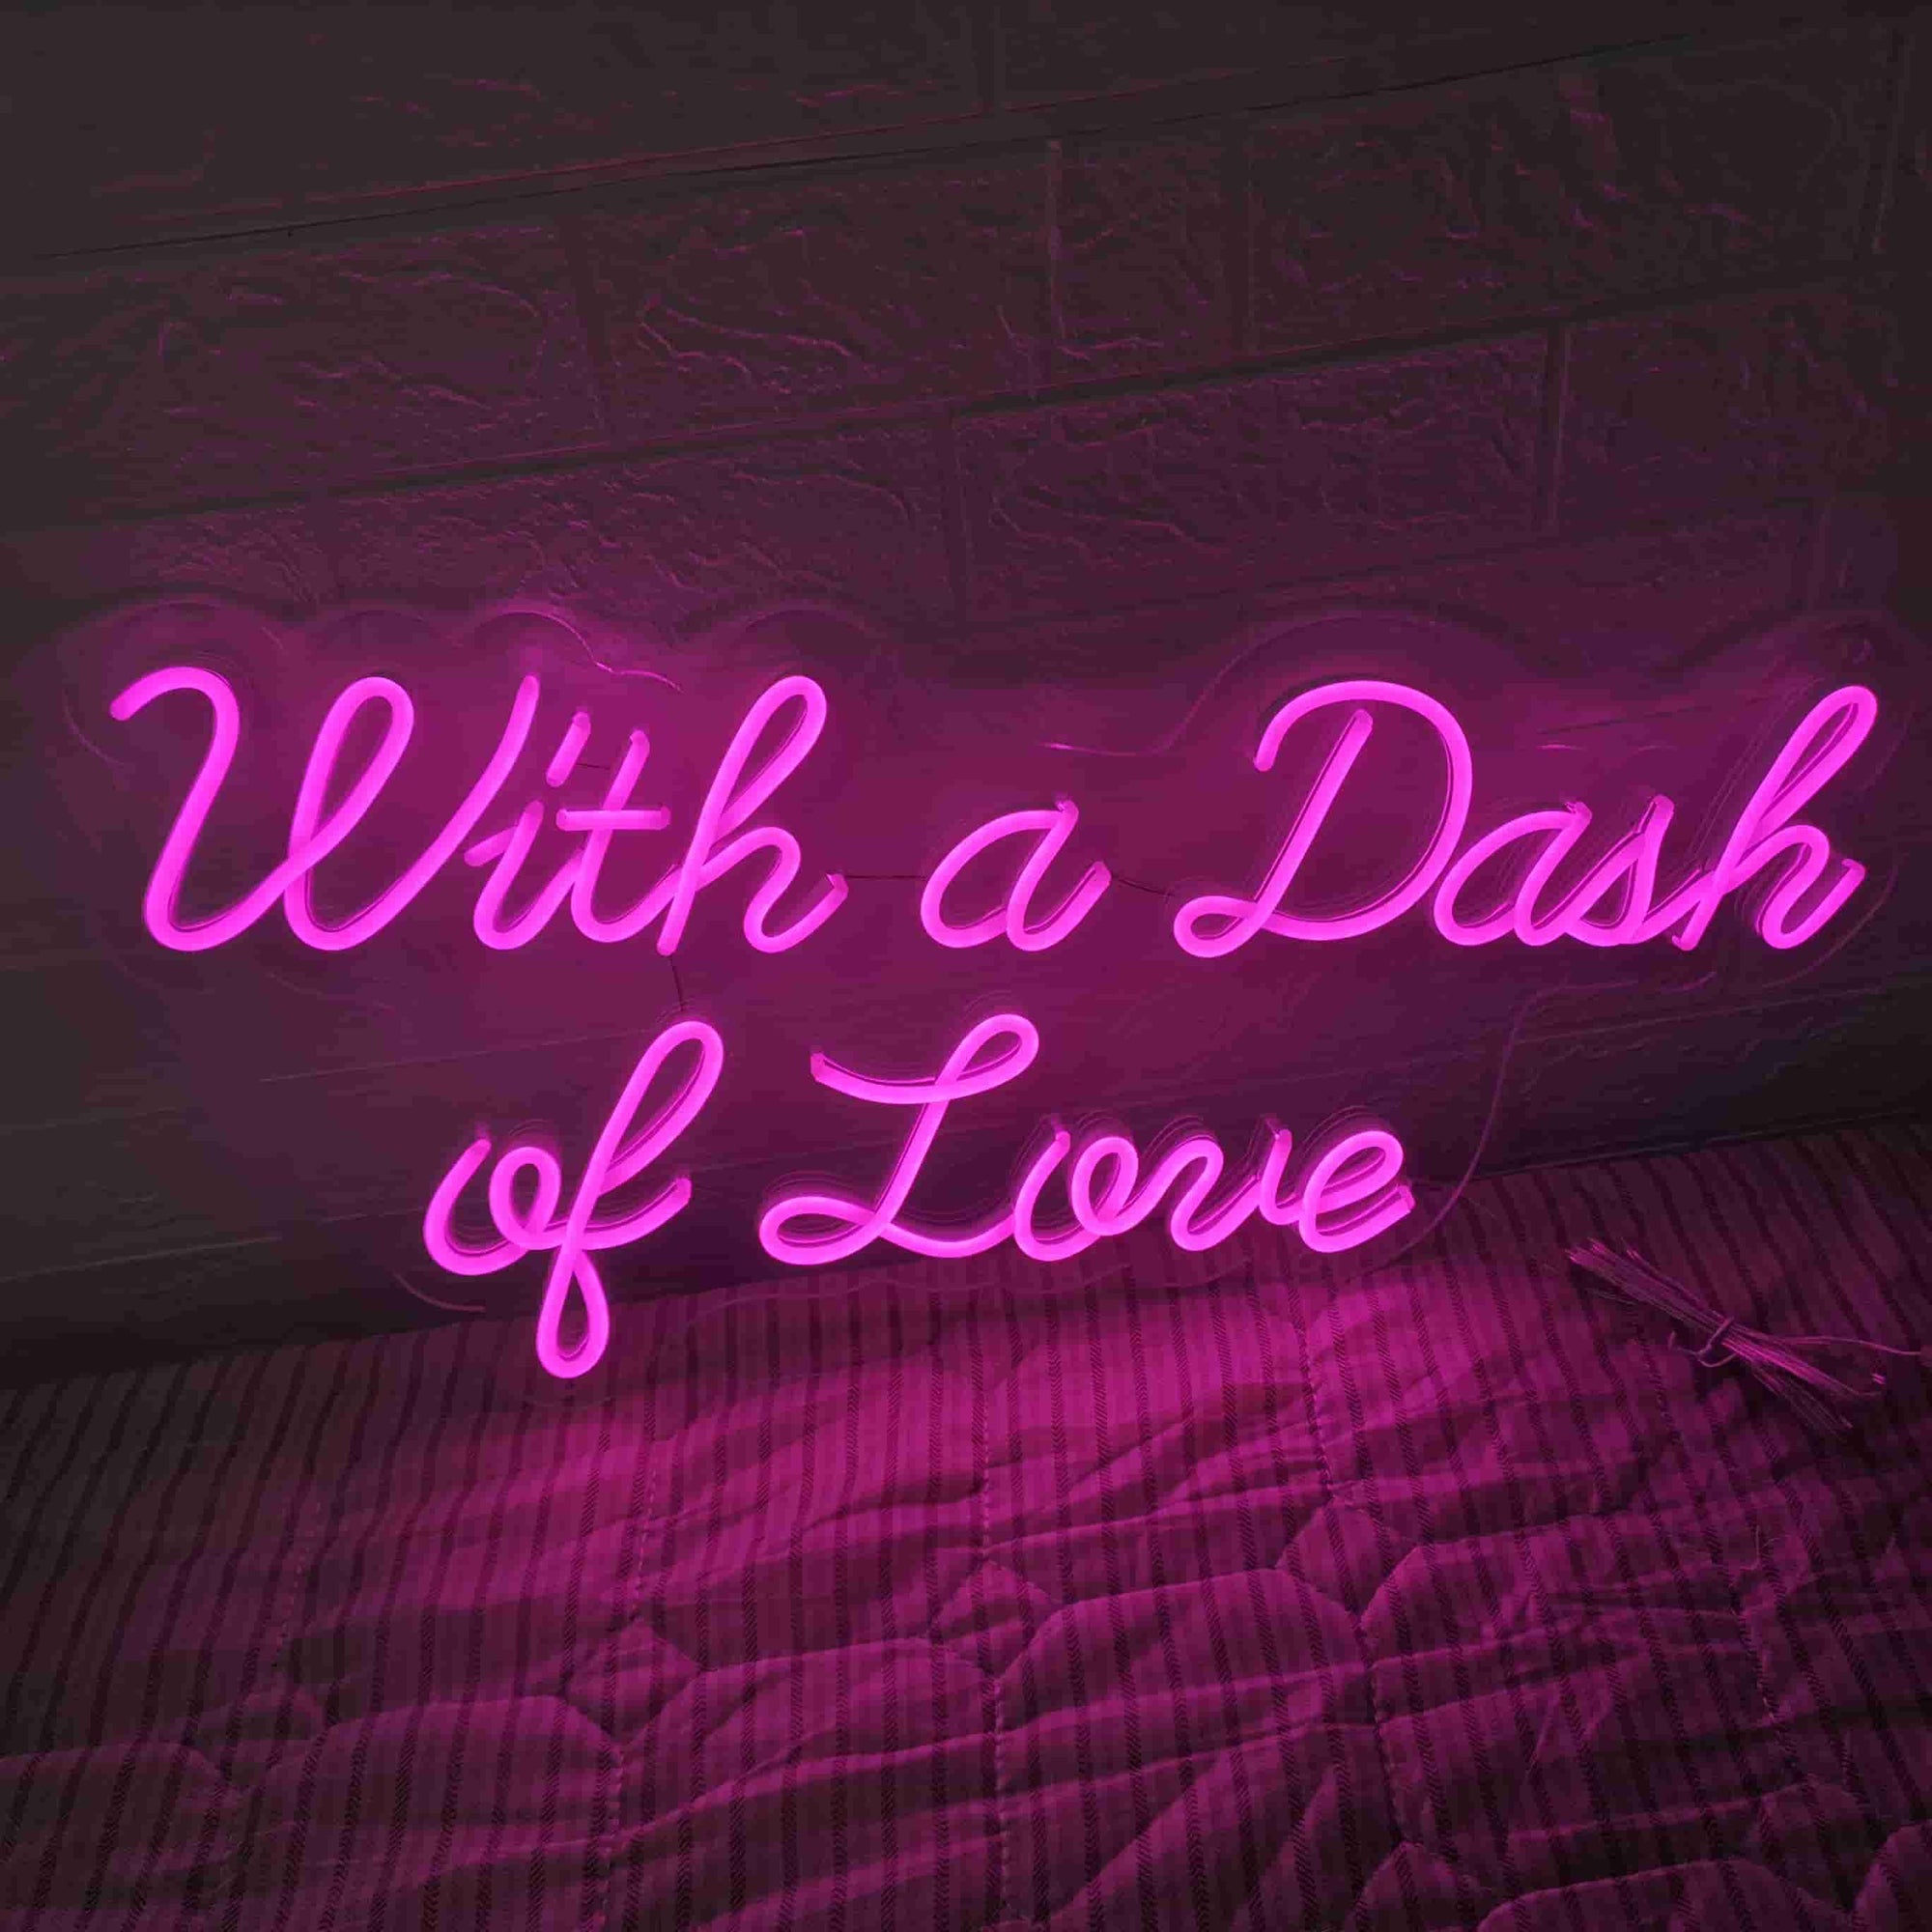 Selicor With A Dash of Love Neon sign Custom, Led Wedding Sign for Wall Decor, Christmas Gifts